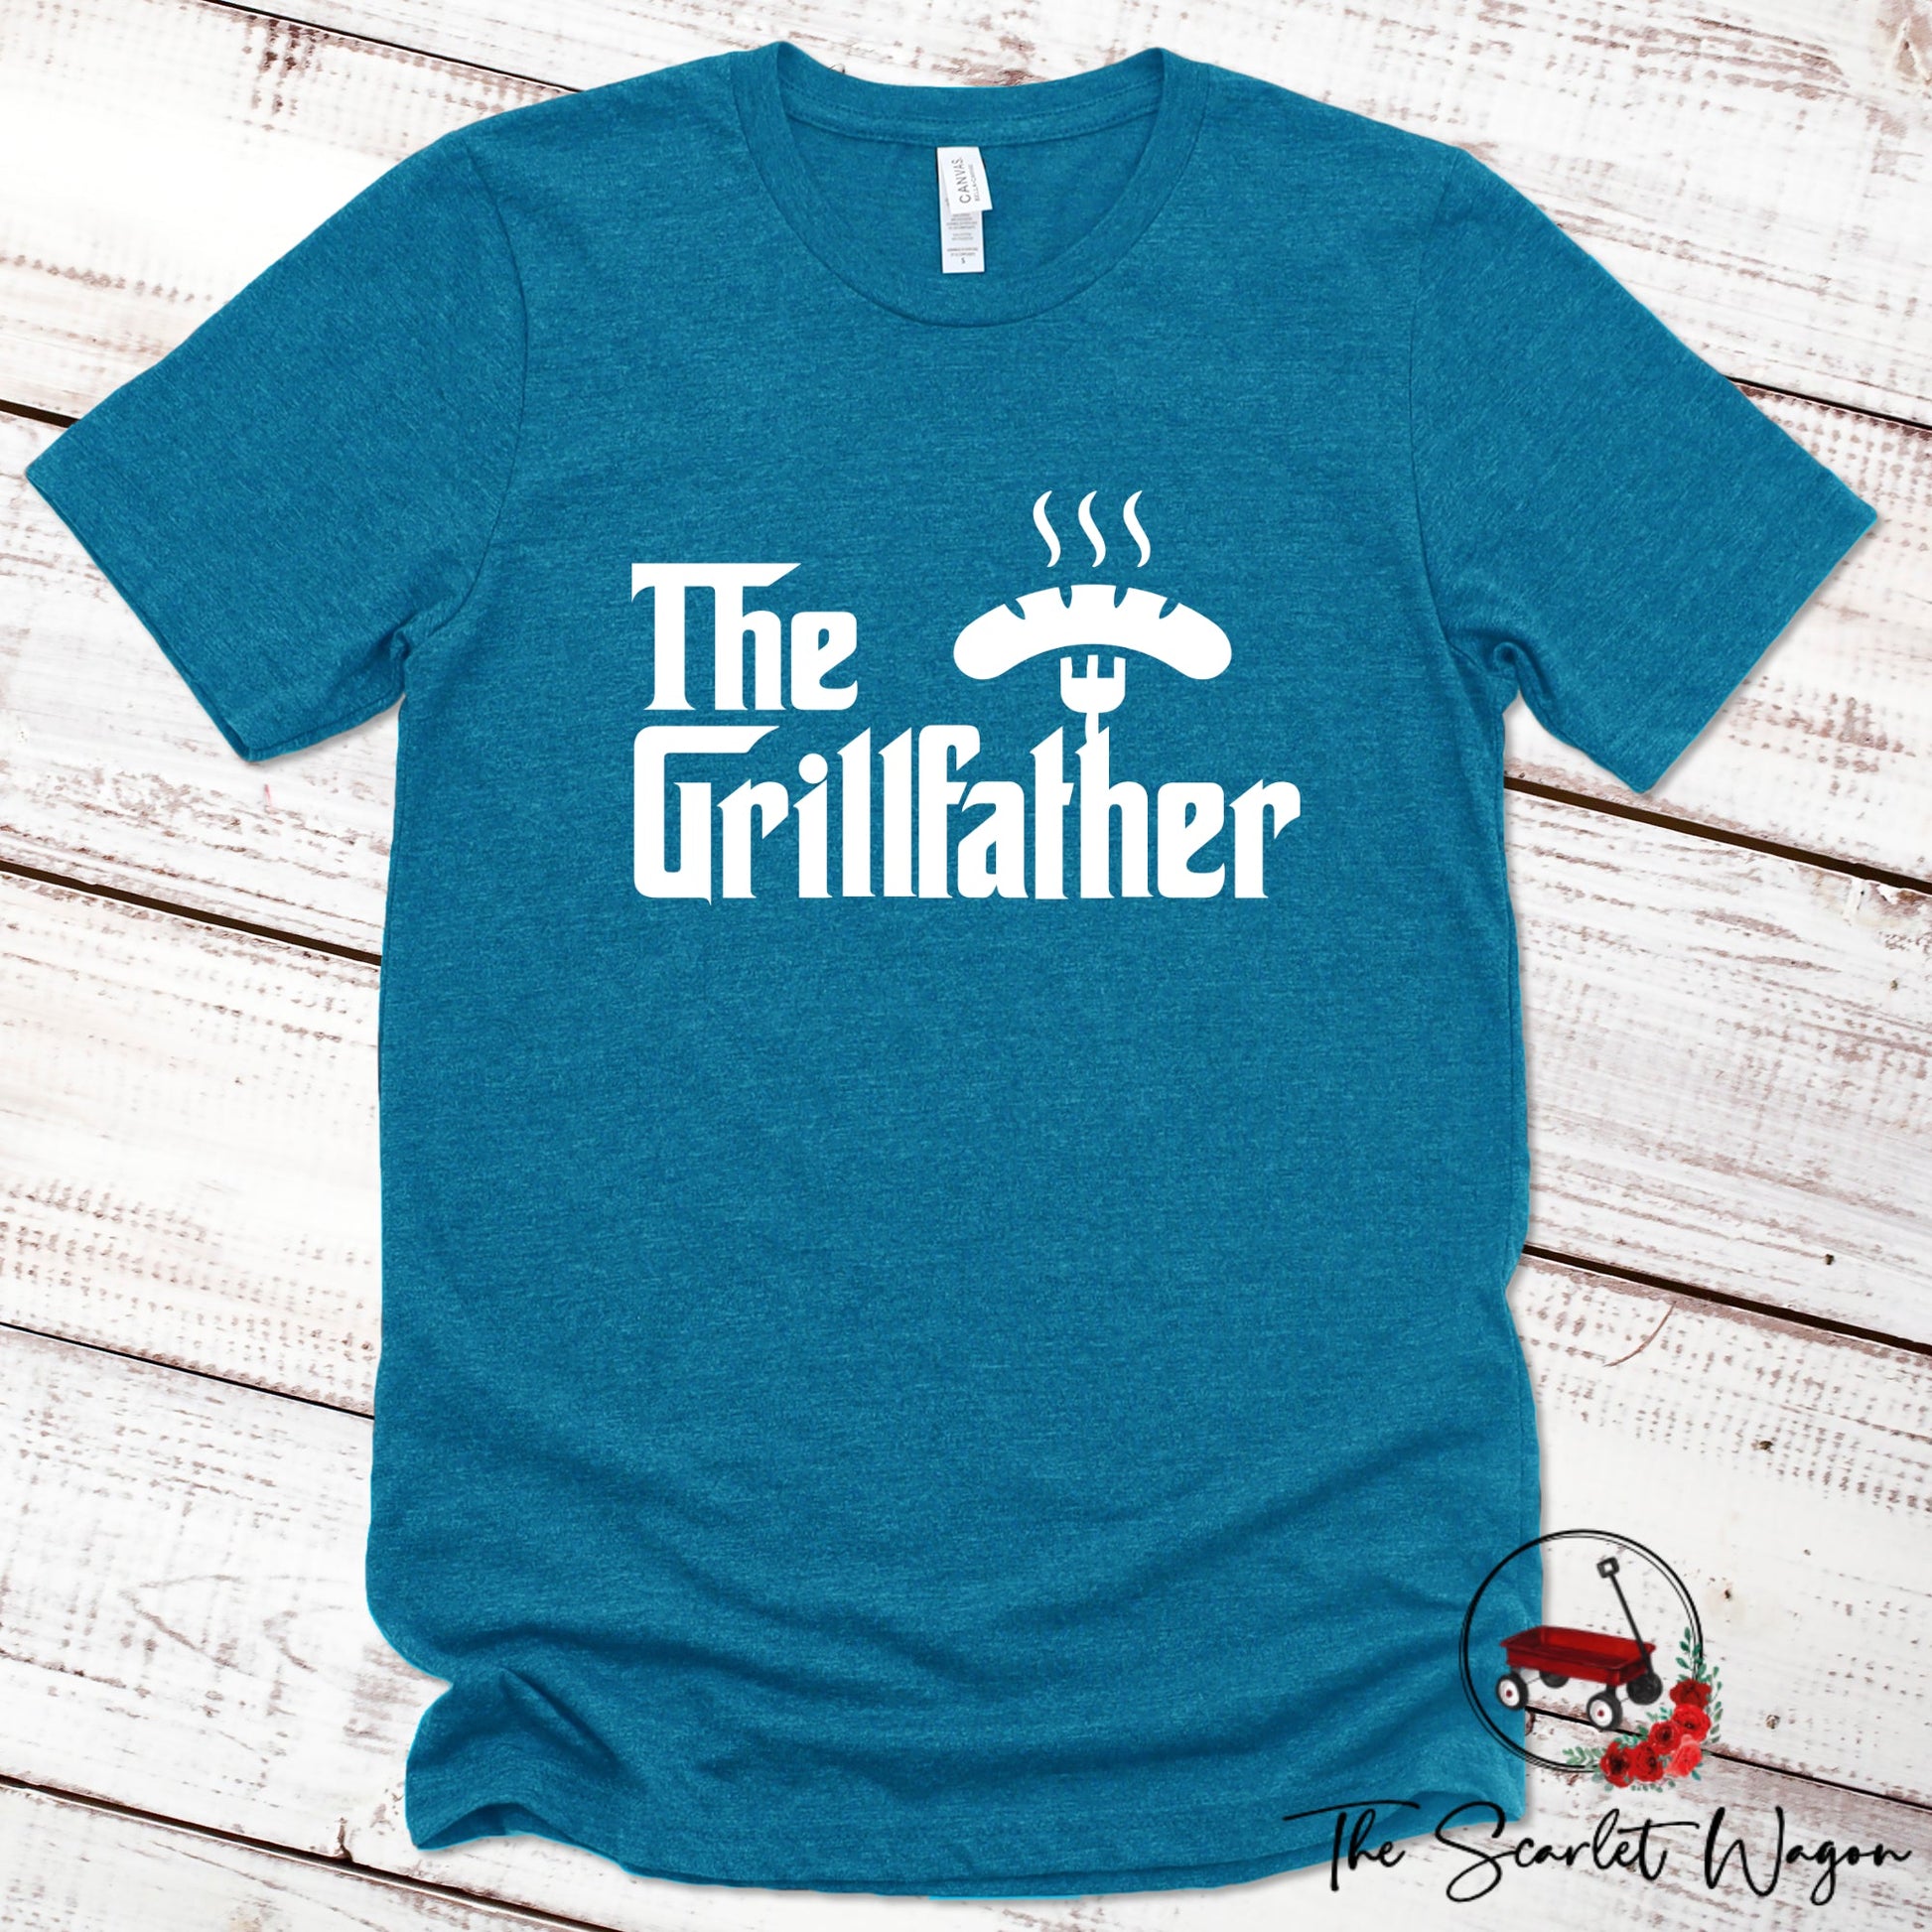 The Grillfather Premium Tee Scarlet Wagon Heather Deep Teal XS 